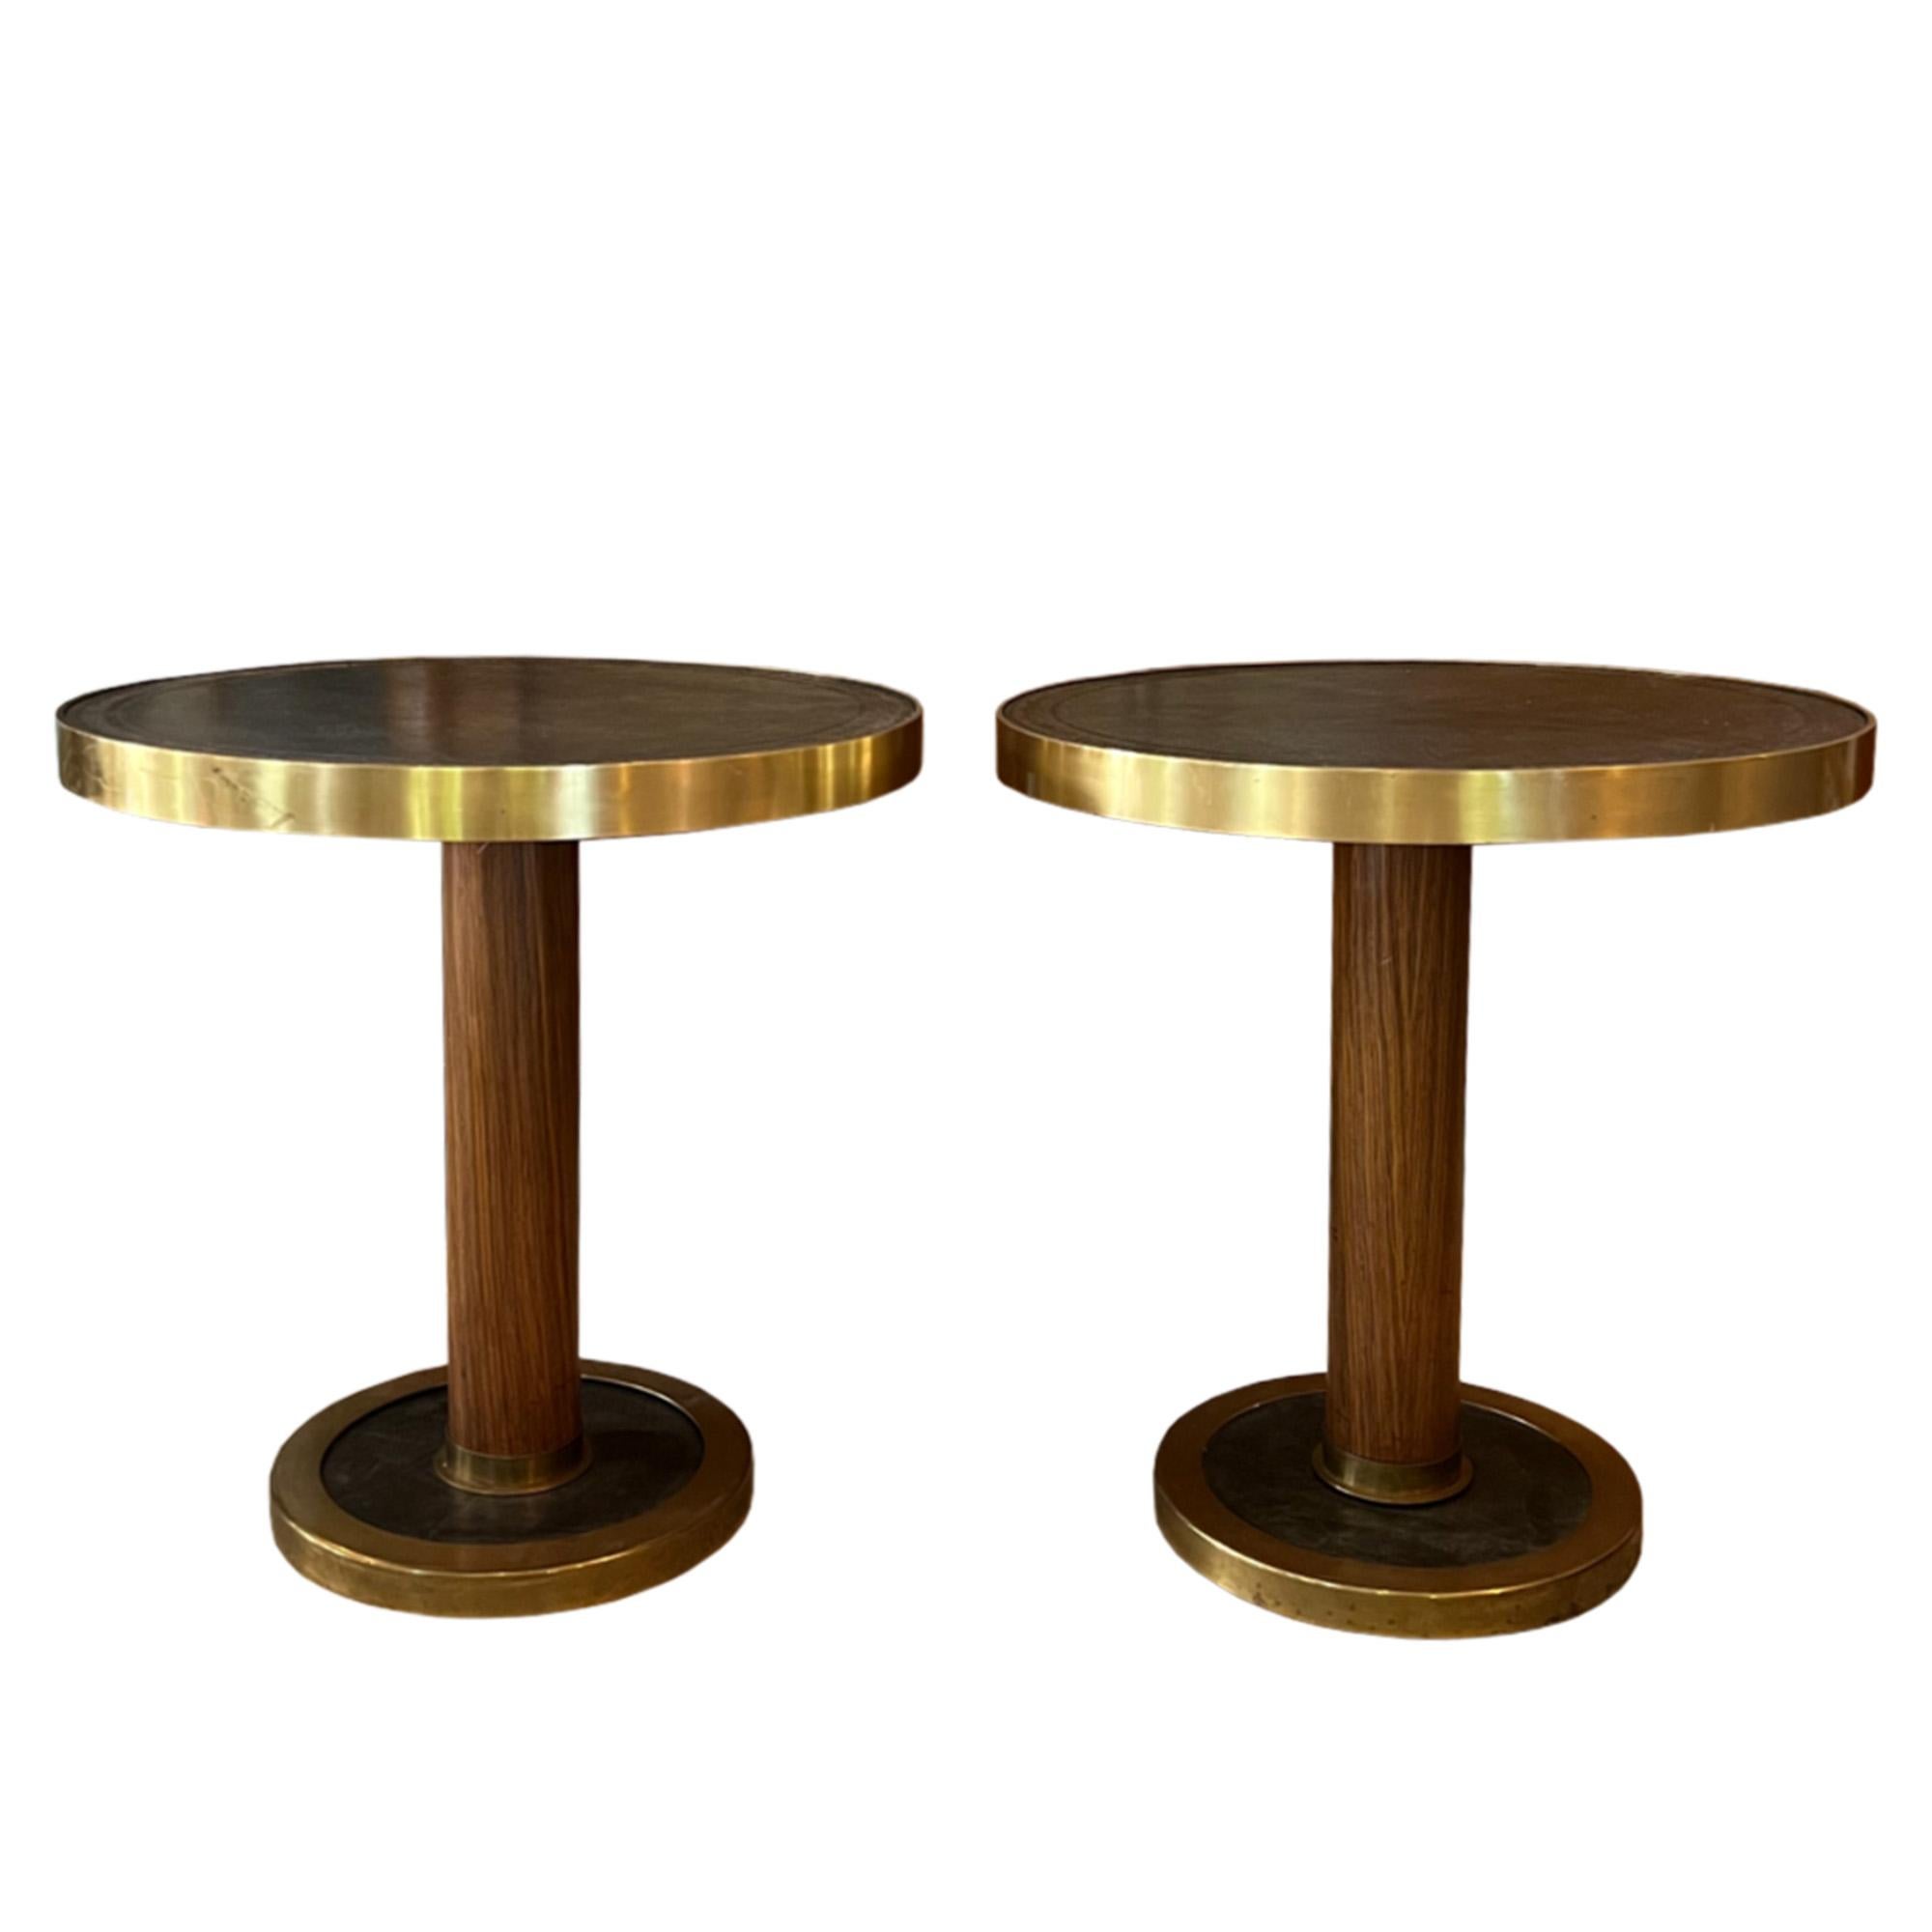 An attractive pair of side tables, designed to remain stable on board a ship. 

The brown leather tops are tooled nicely with a bronze embossed design - these are supported by wood columns and solid bases.

Finished with brass detail, these